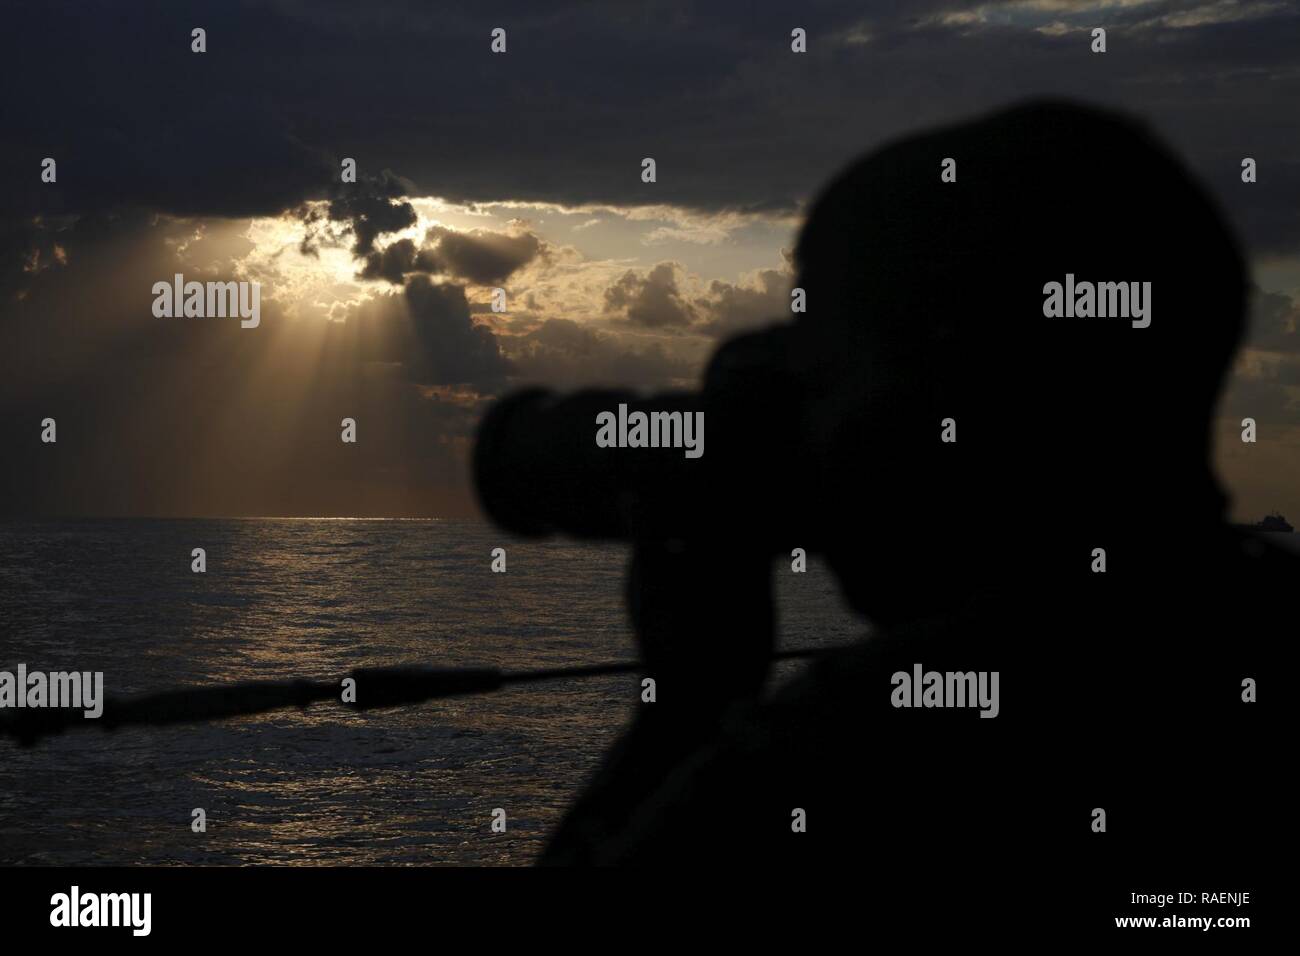 GULF OF OMAN (Dec. 15, 2018) U.S. Army Specialist David Resnick, a Combat Cameraman, takes photographs aboard the Cyclone-class coastal patrol ship USS Thunderbolt (PC 12). Thunderbolt is deployed to the U.S. 5th Fleet area of operations in support of naval operations to ensure maritime stability and security in the Central Region, connecting the Mediterranean and the Pacific through the western Indian Ocean and three strategic choke points. Stock Photo